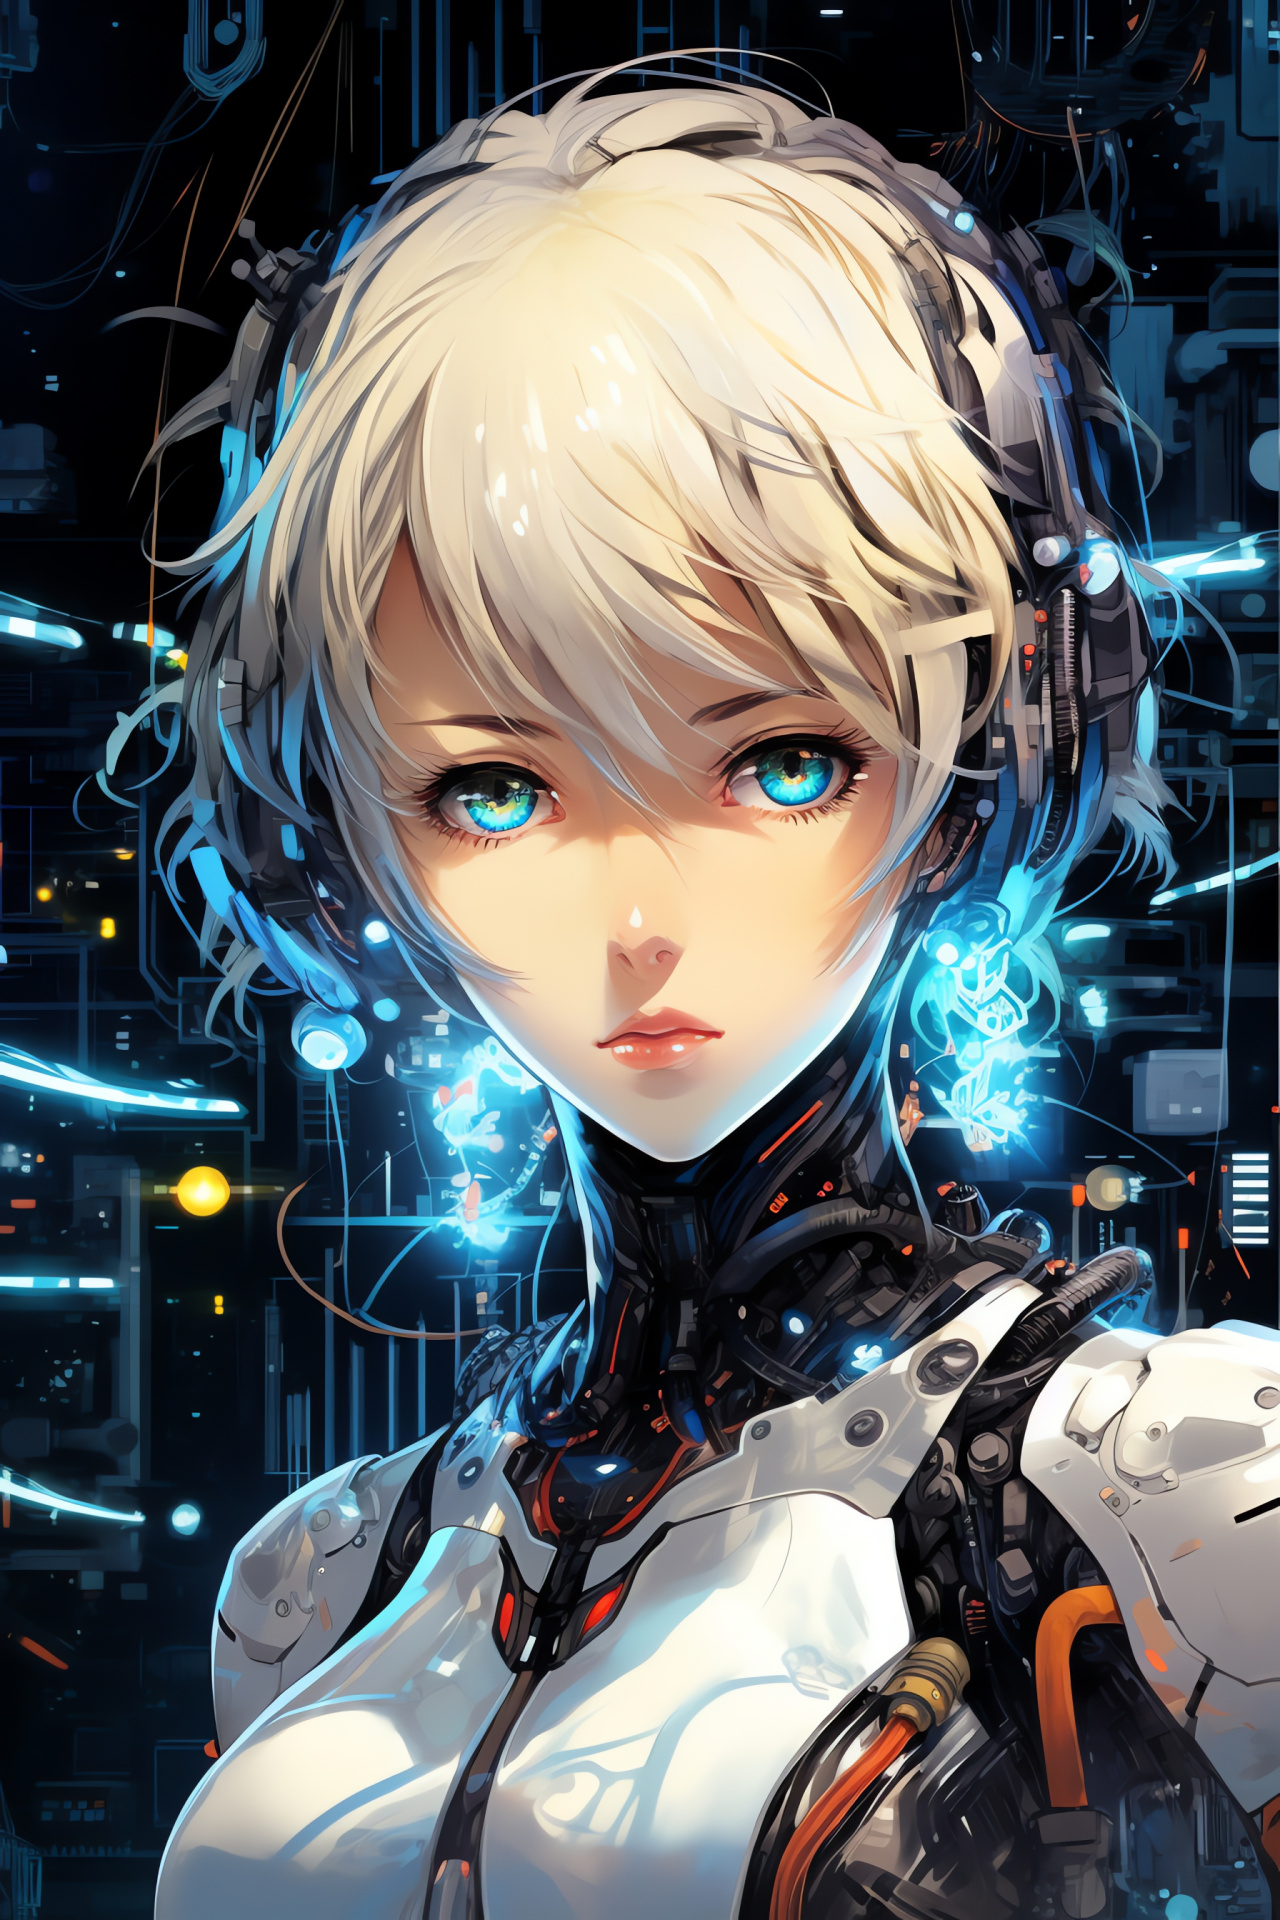 Aigis advanced combat gear, Laboratory setting, Electronic displays, Mechanical research lab, Optical engagement, HD Phone Image